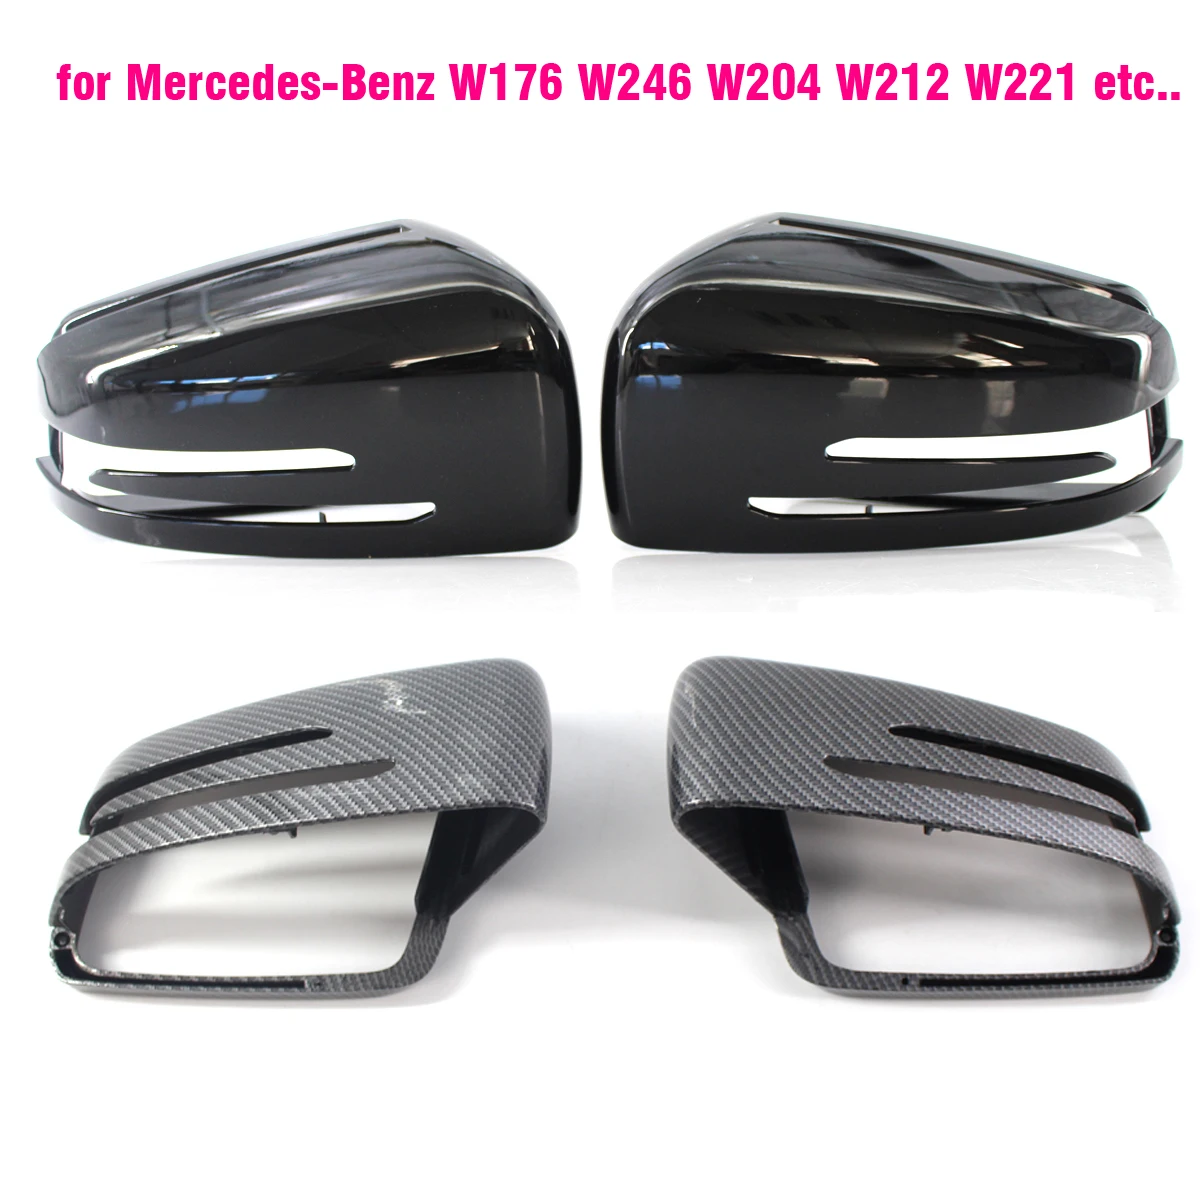 Rear view Mirror Covers For Mercedes-Benz W204 E W212 W176 W246 CLS C218 GLA X156 ABS Carbon Fiber Gloss Black